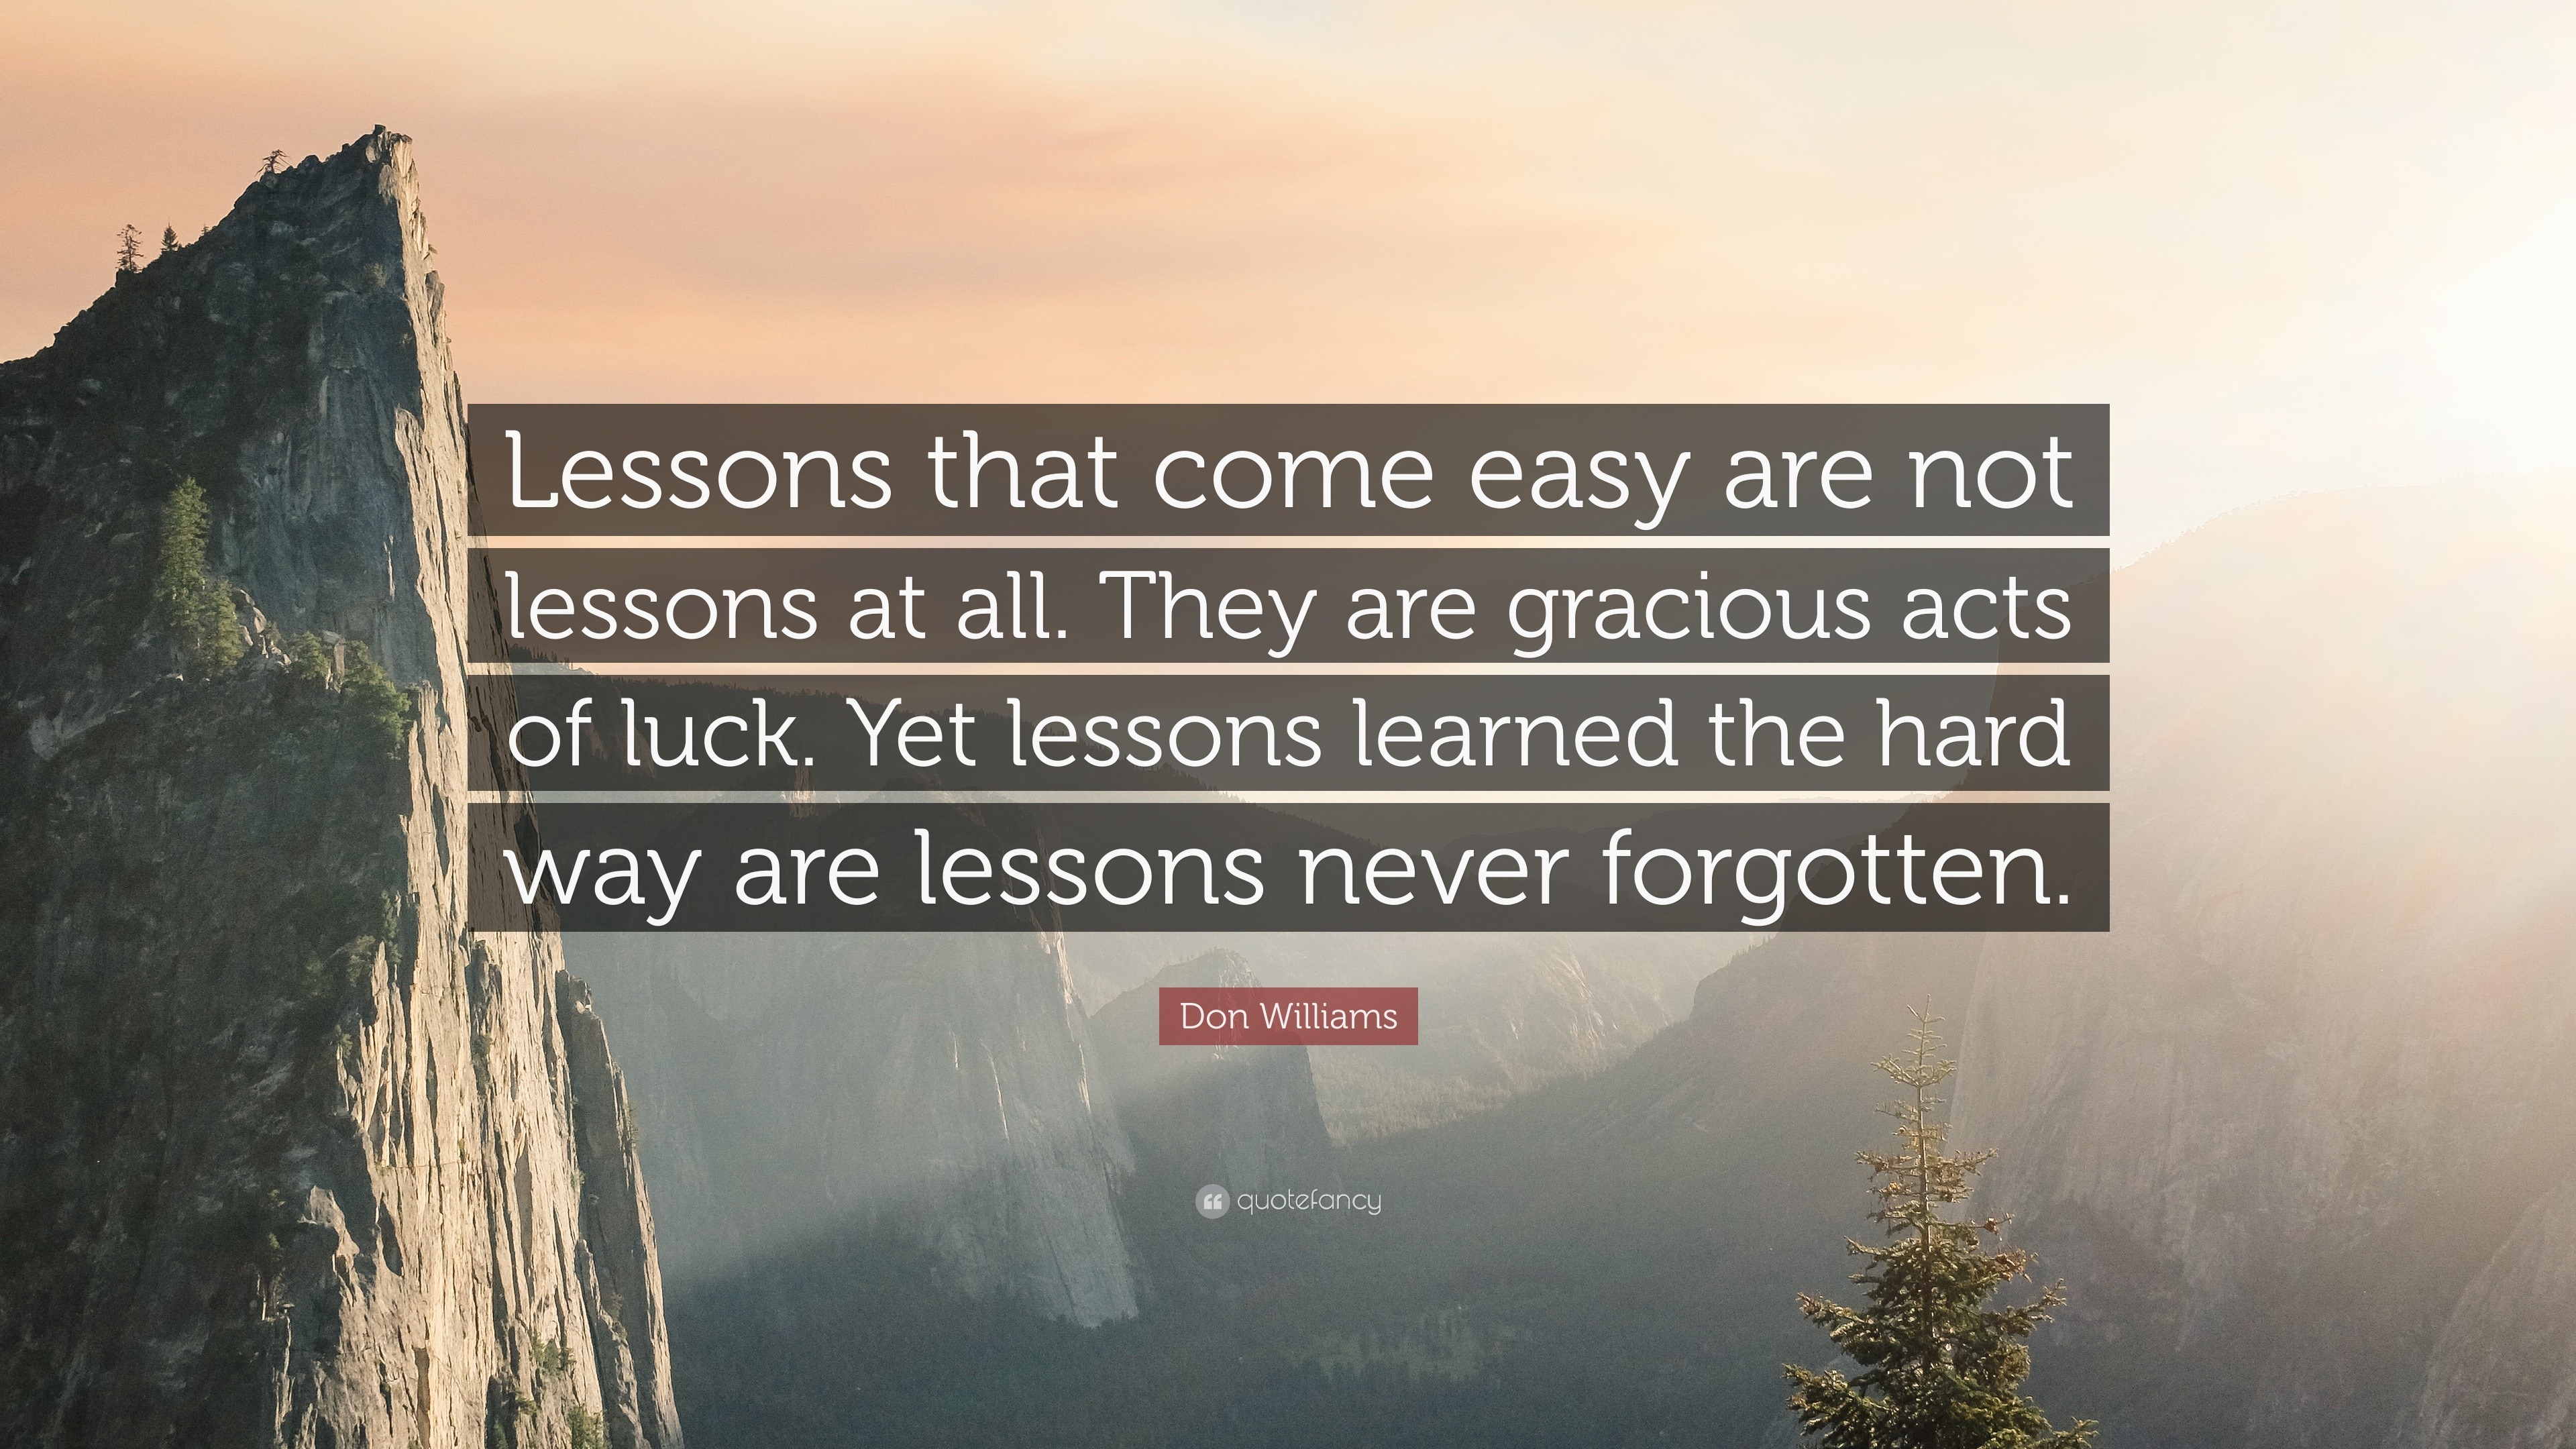 Lessons Learned the Hard Way